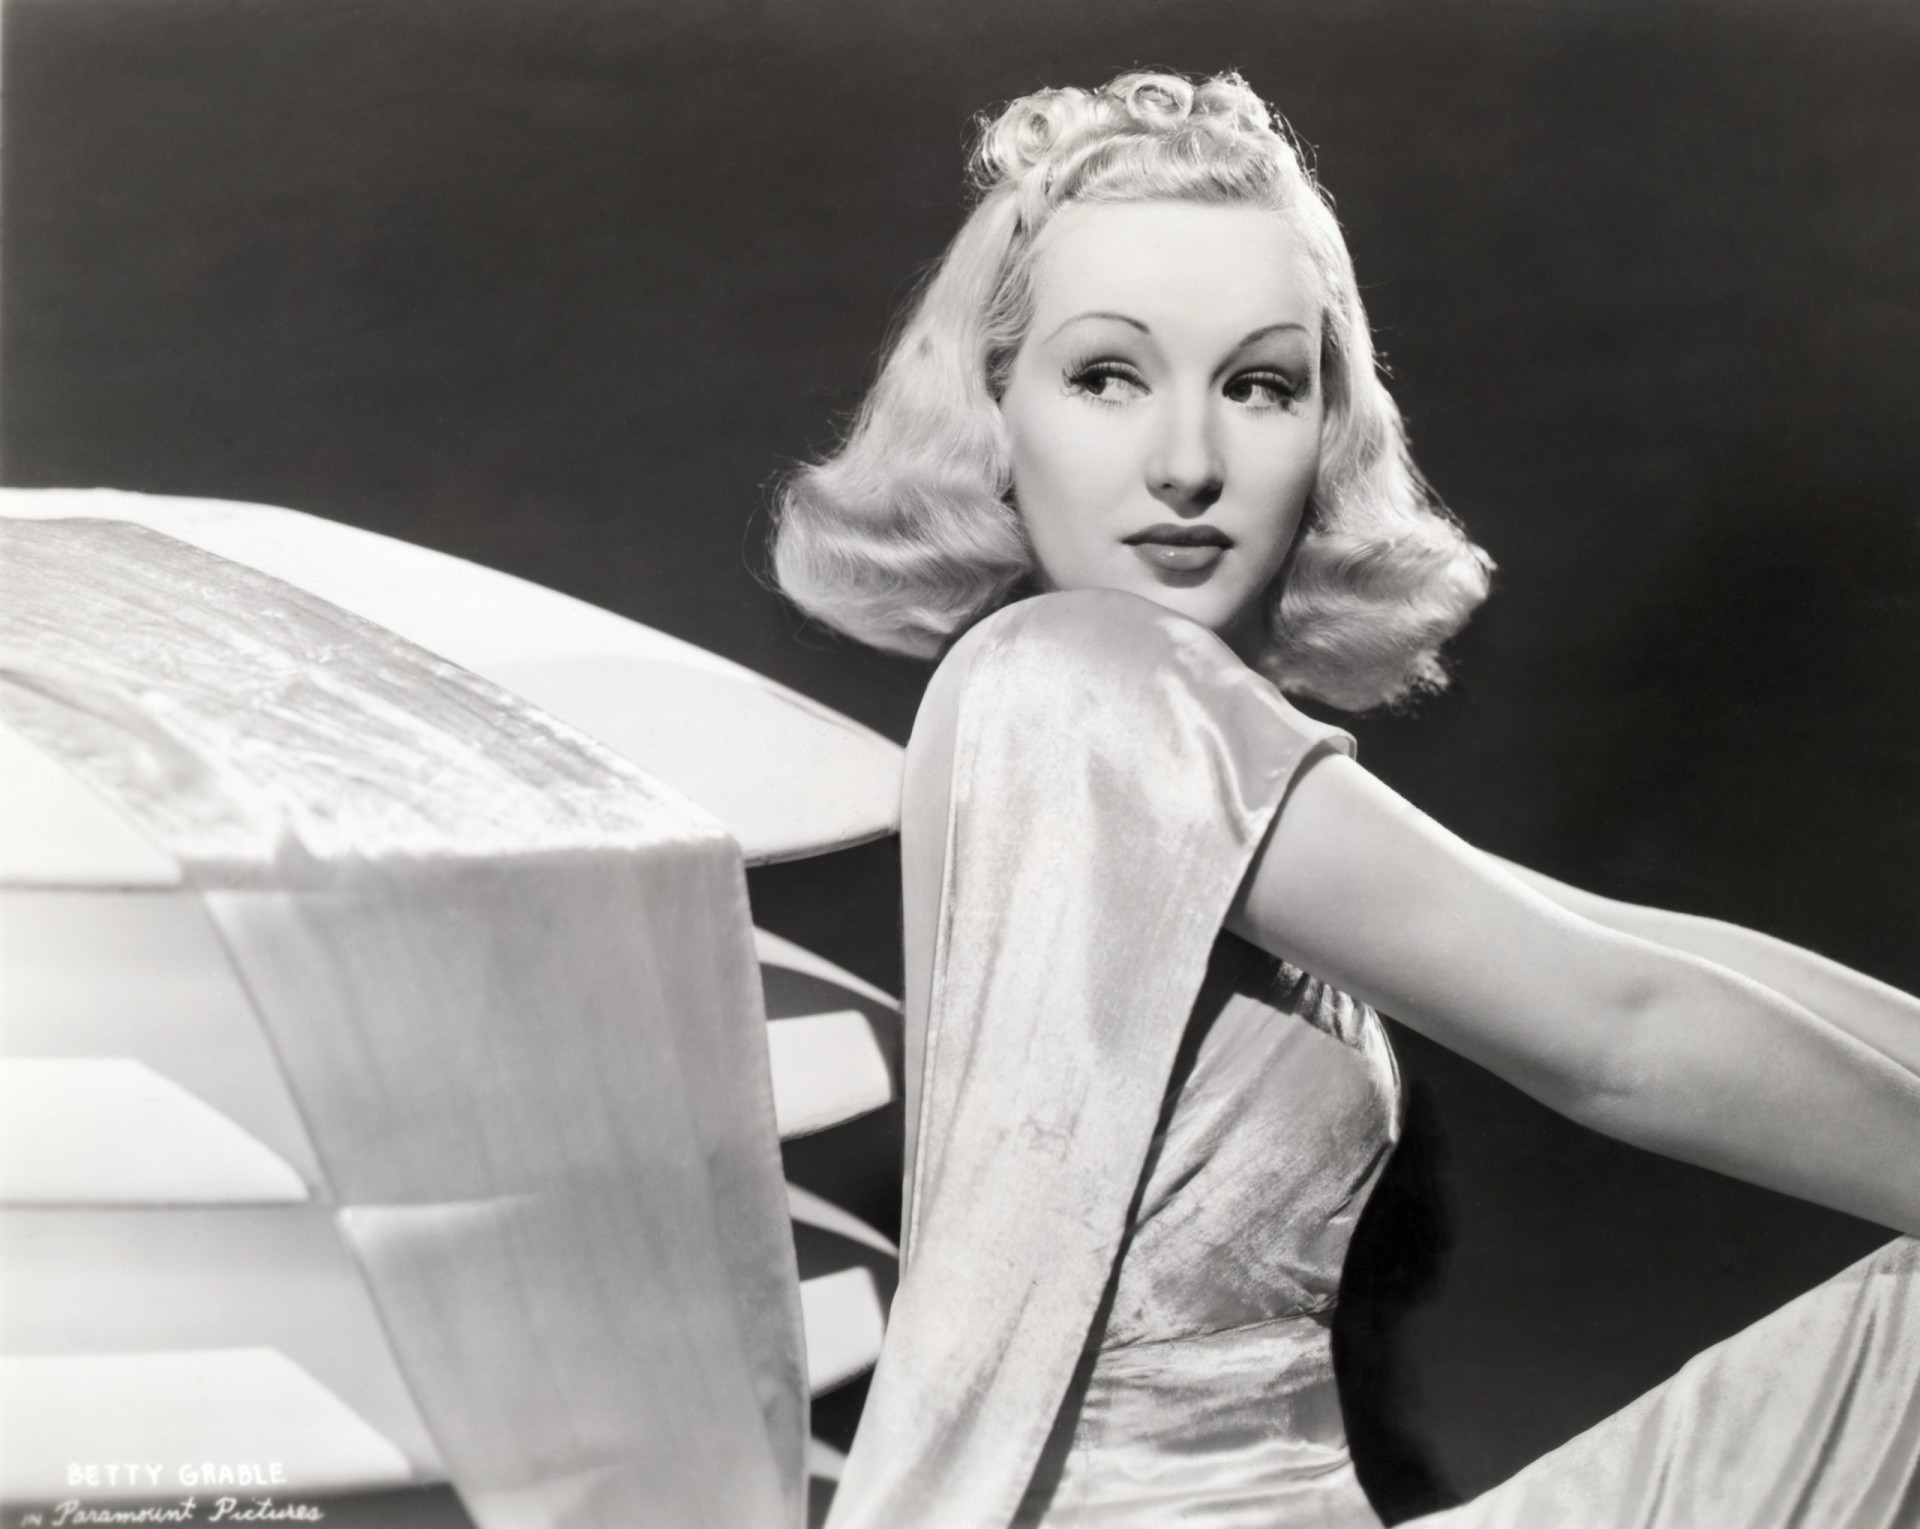 <p>Betty Grable was an iconic pinup girl during World War II, and her figure was painted onto the noses of many US fighter jets! In 1943, she became the biggest box-office draw in the world, and in 1947 she was the highest-paid entertainer in the US.</p><p><a href="https://www.msn.com/en-us/community/channel/vid-7xx8mnucu55yw63we9va2gwr7uihbxwc68fxqp25x6tg4ftibpra?cvid=94631541bc0f4f89bfd59158d696ad7e">Follow us and access great exclusive content every day</a></p>